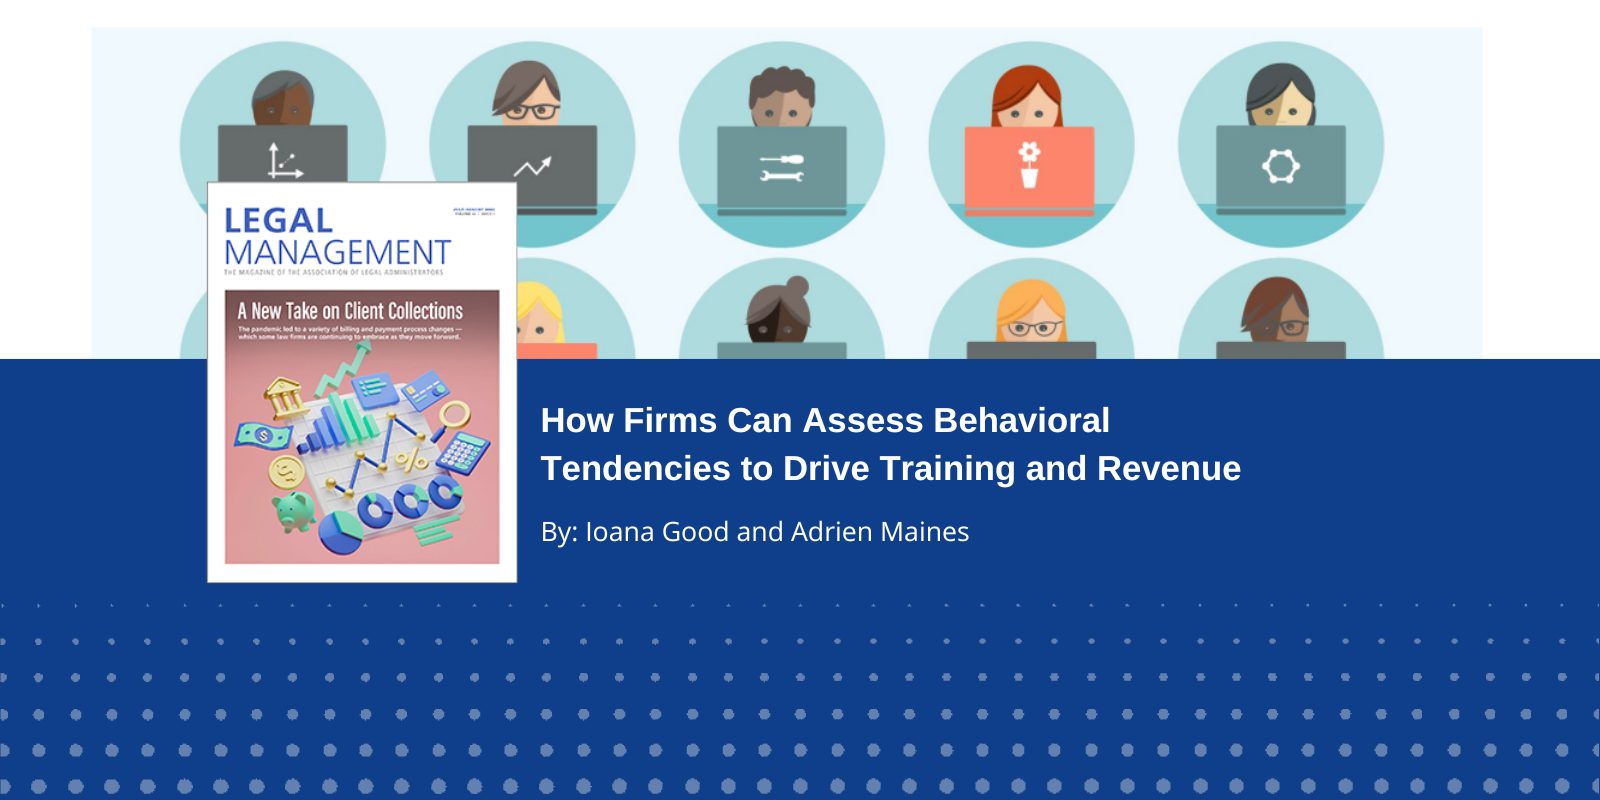 Featured image for “How Firms Can Assess Behavioral Tendencies to Drive Training and Revenue”